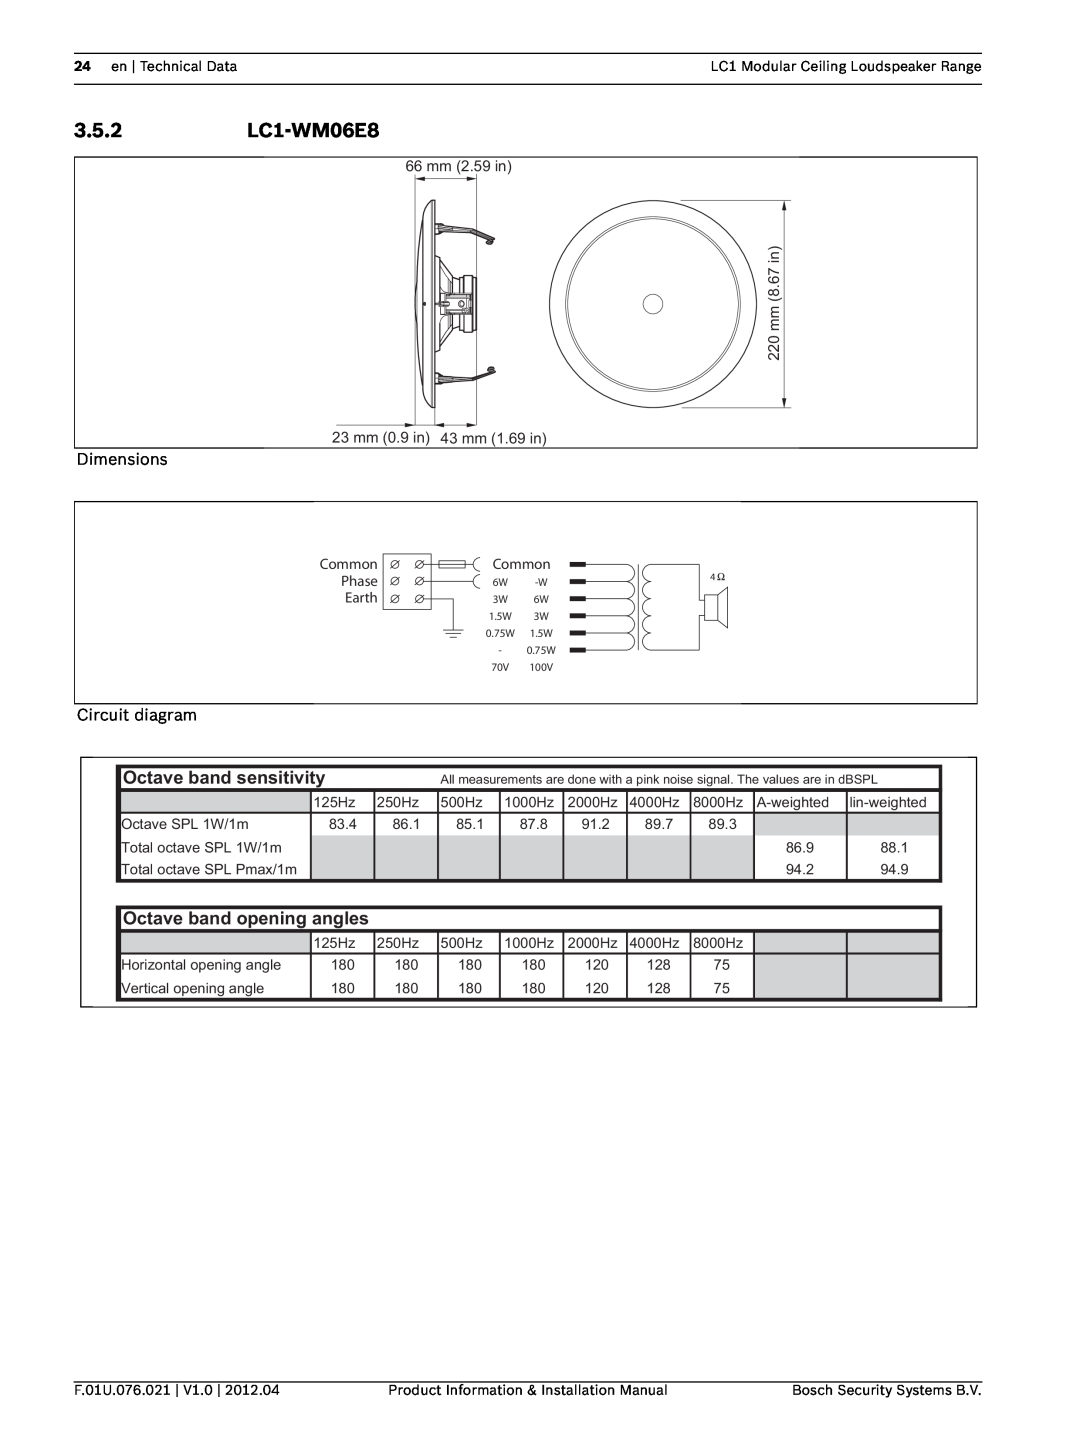 Bosch Appliances installation manual 3.5.2LC1-WM06E8, Octave band sensitivity, Octave band opening angles 